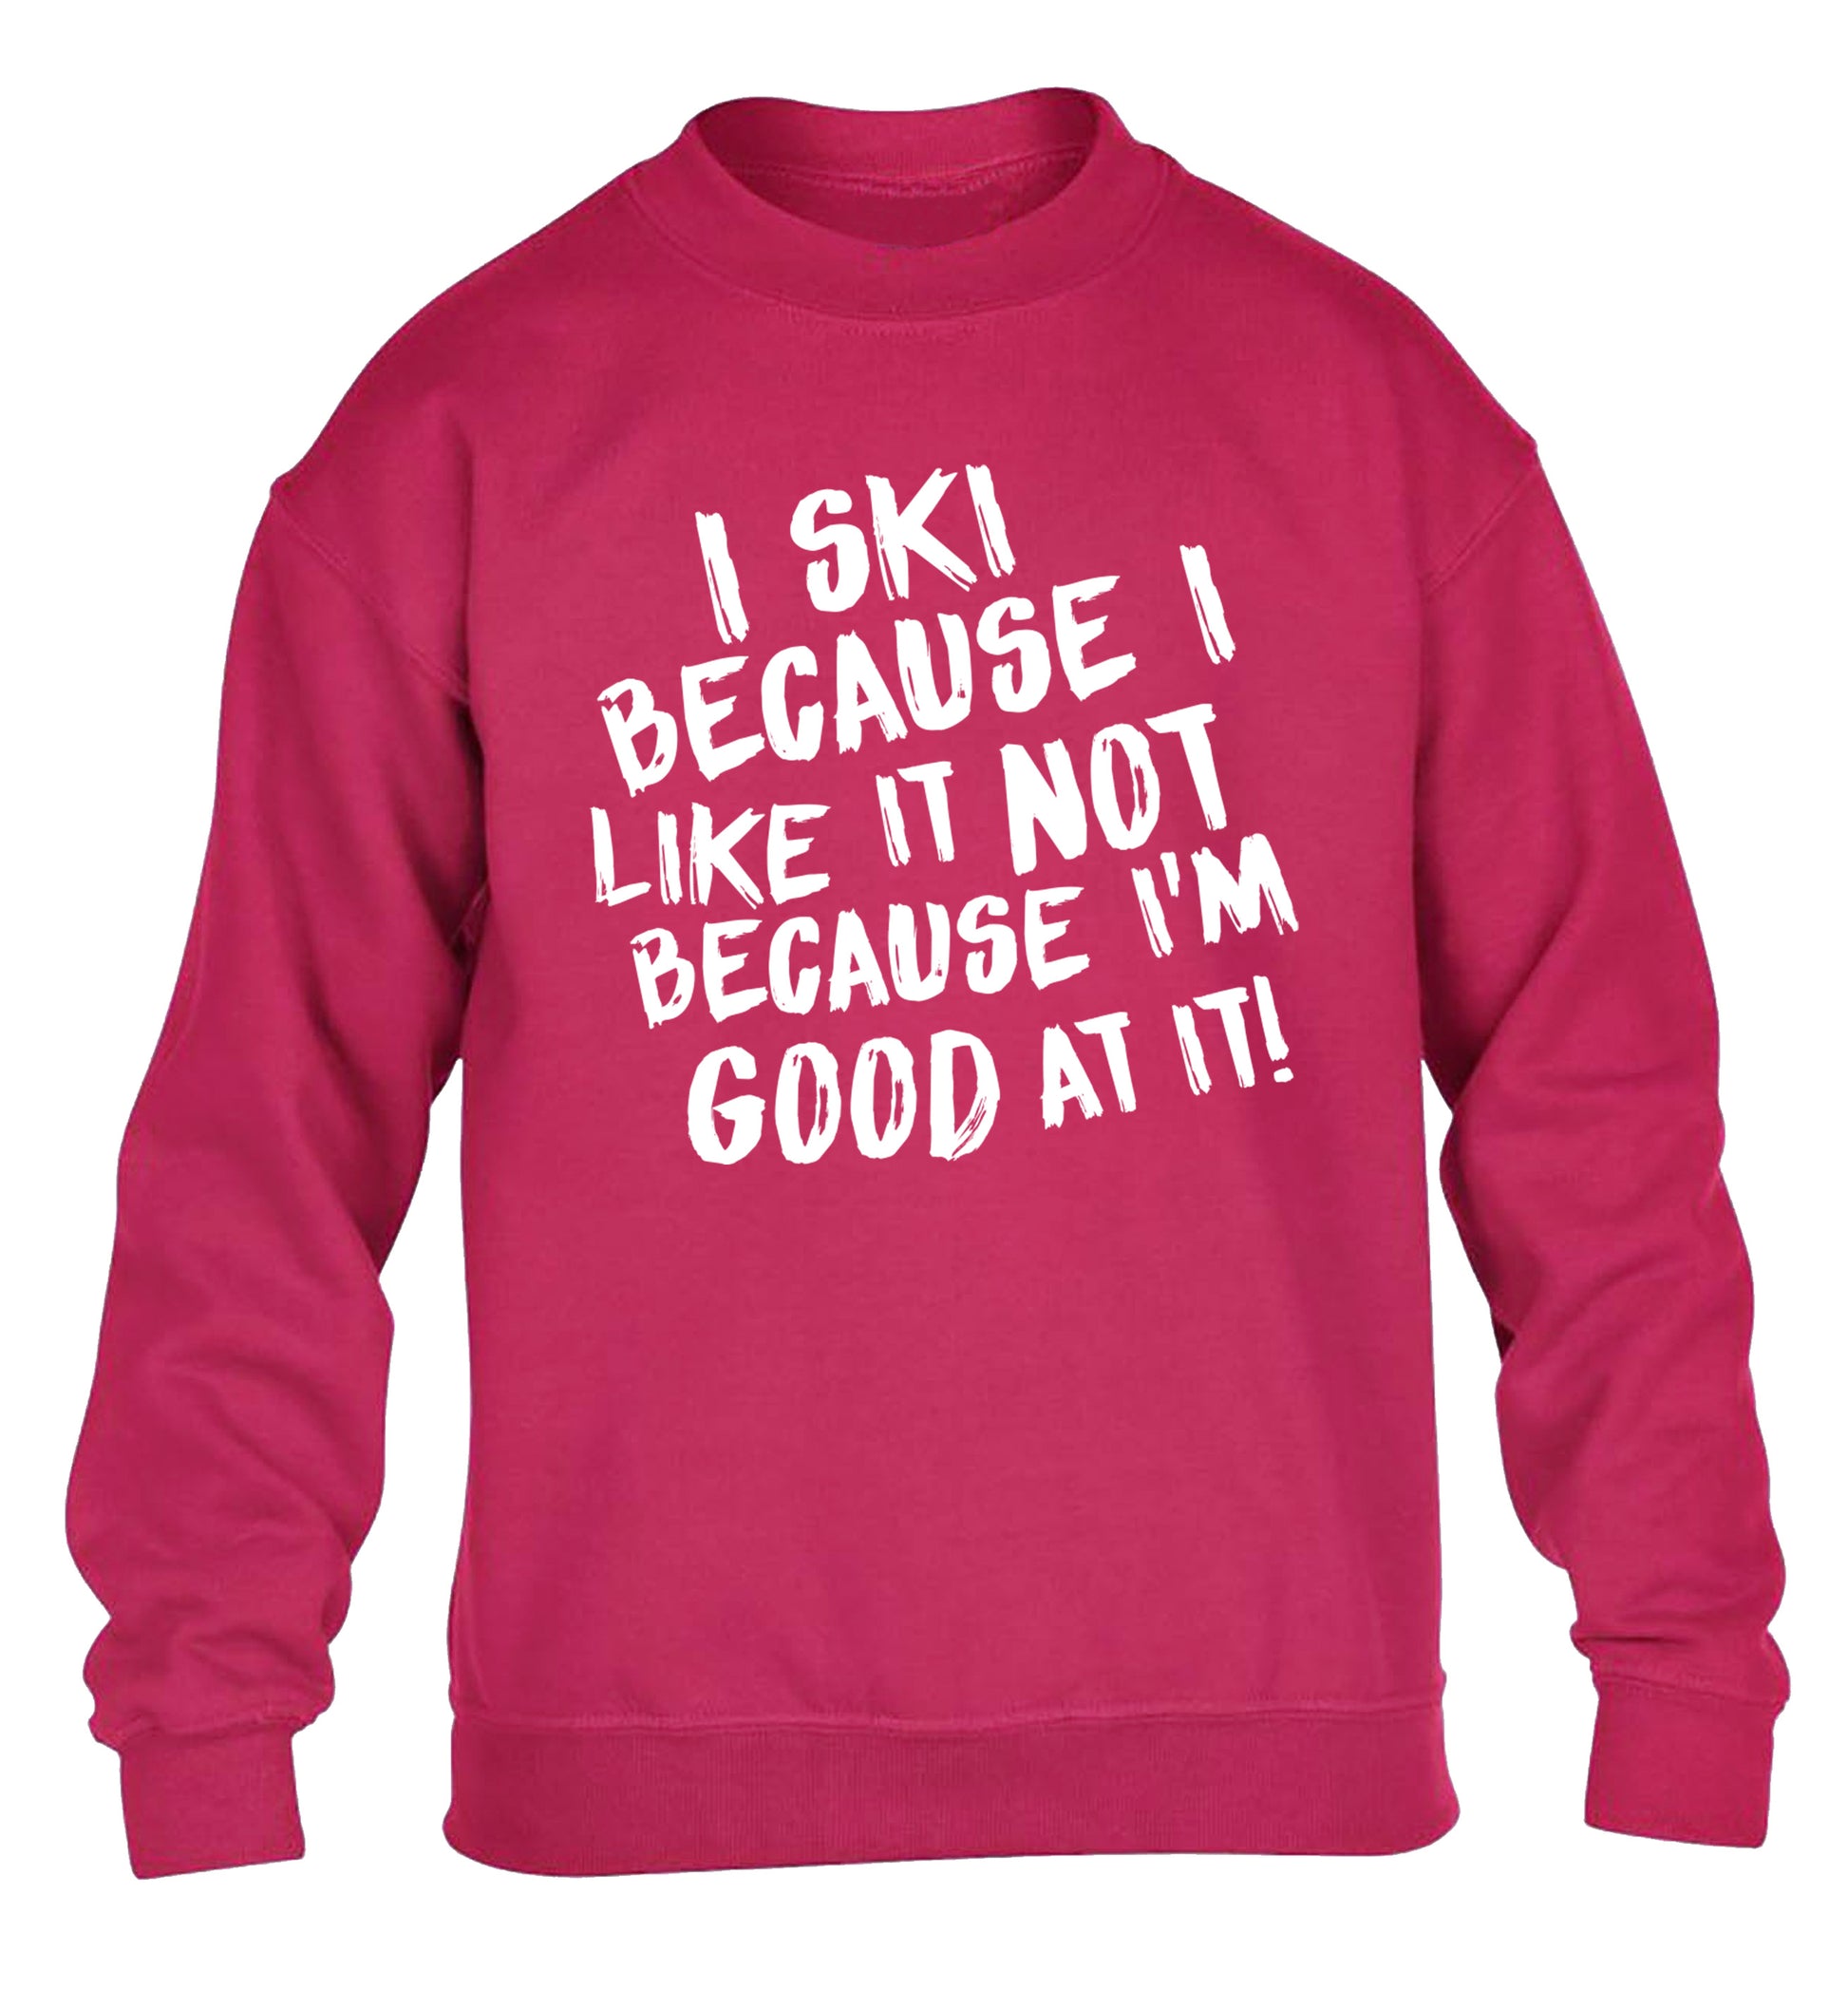 I ski because I like it not because I'm good at it children's pink sweater 12-14 Years